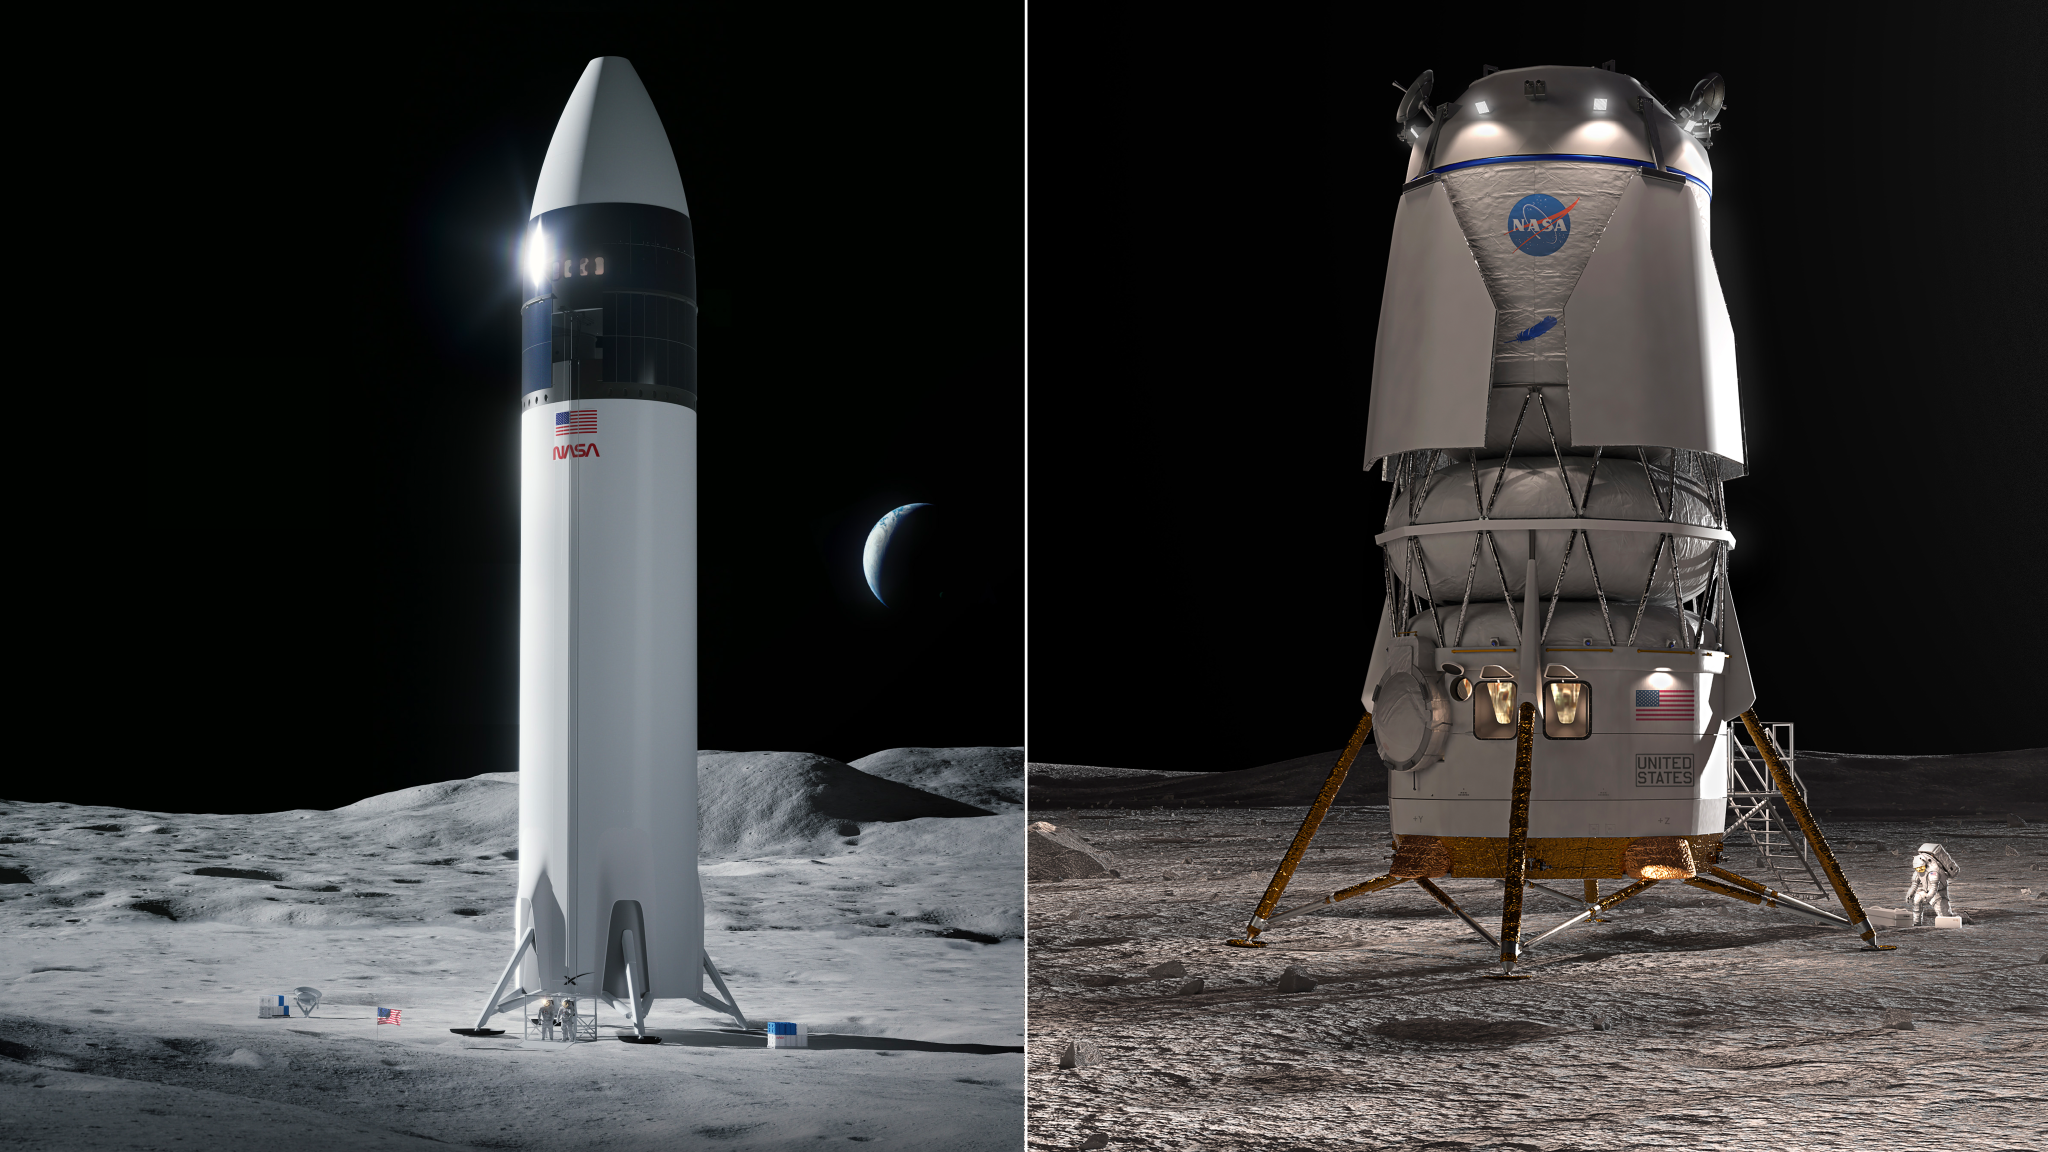 Side-by-side illustrations of the SpaceX Starship lunar lander and the Blue Origin Blue Moon lunar lander. Each is on the lunar surface, with astronauts nearby and Earth in the distance.